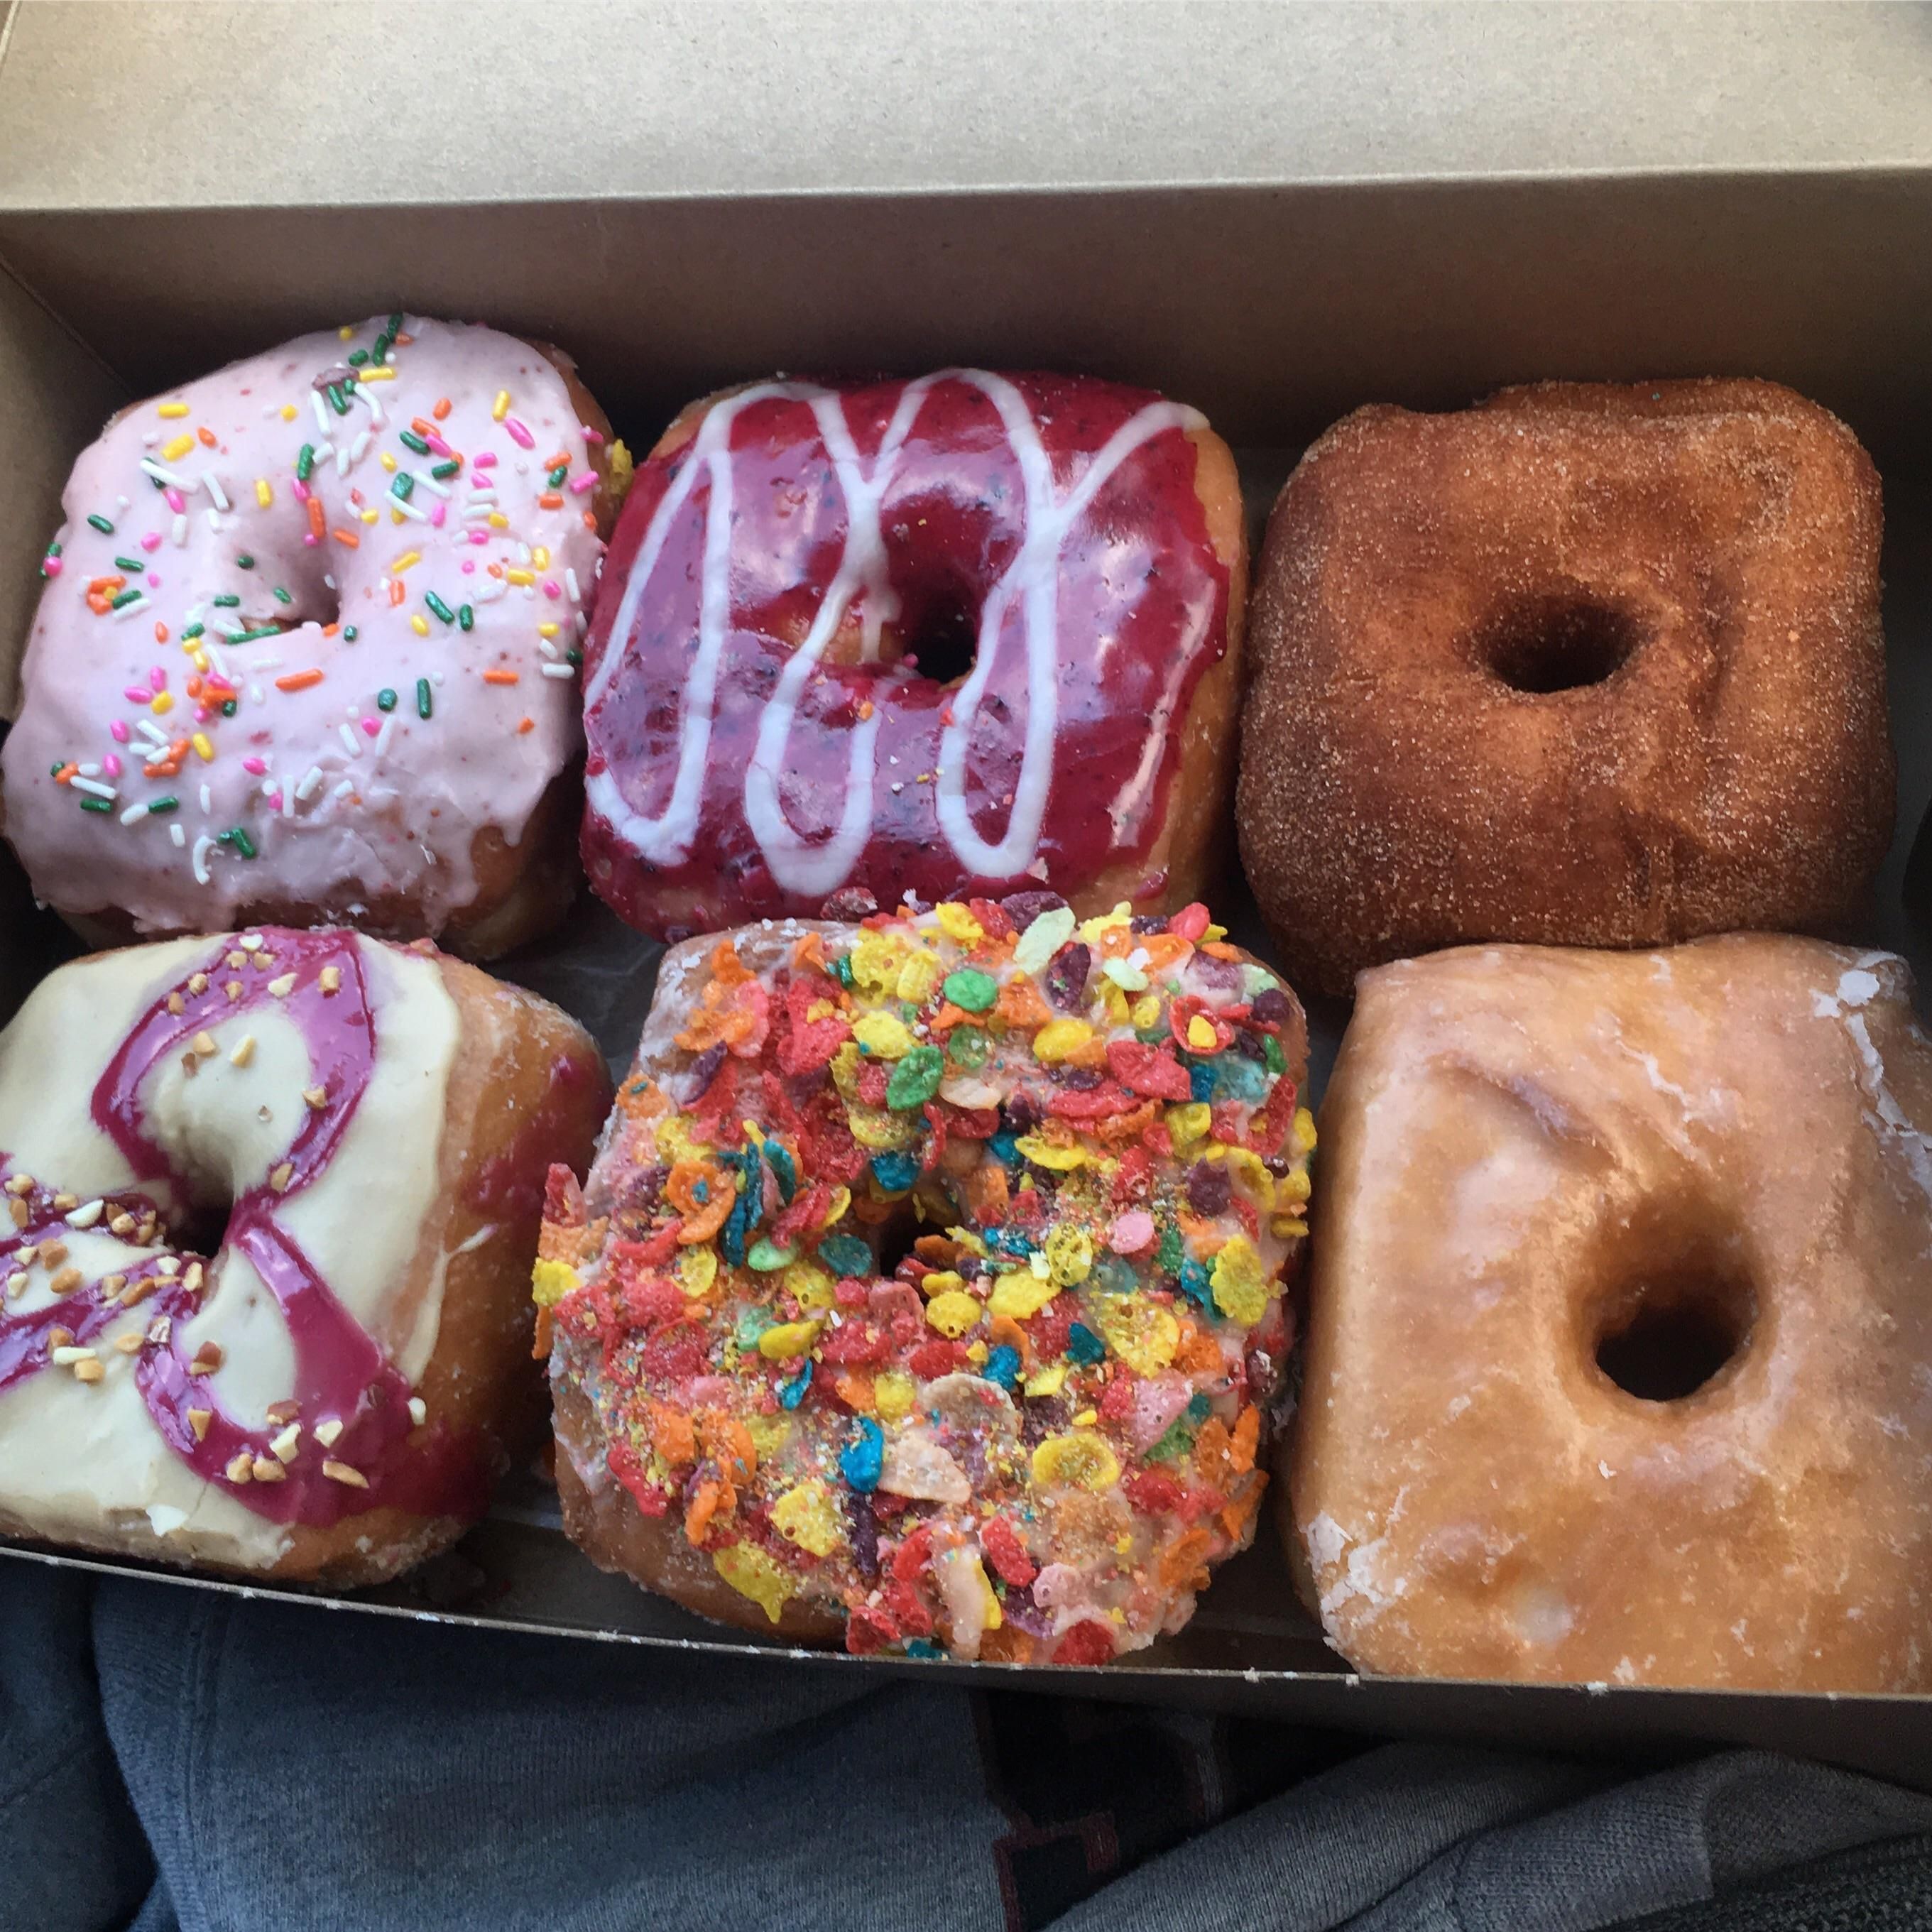 Today I had these delicious donuts from Valkyrie Doughnuts in ...